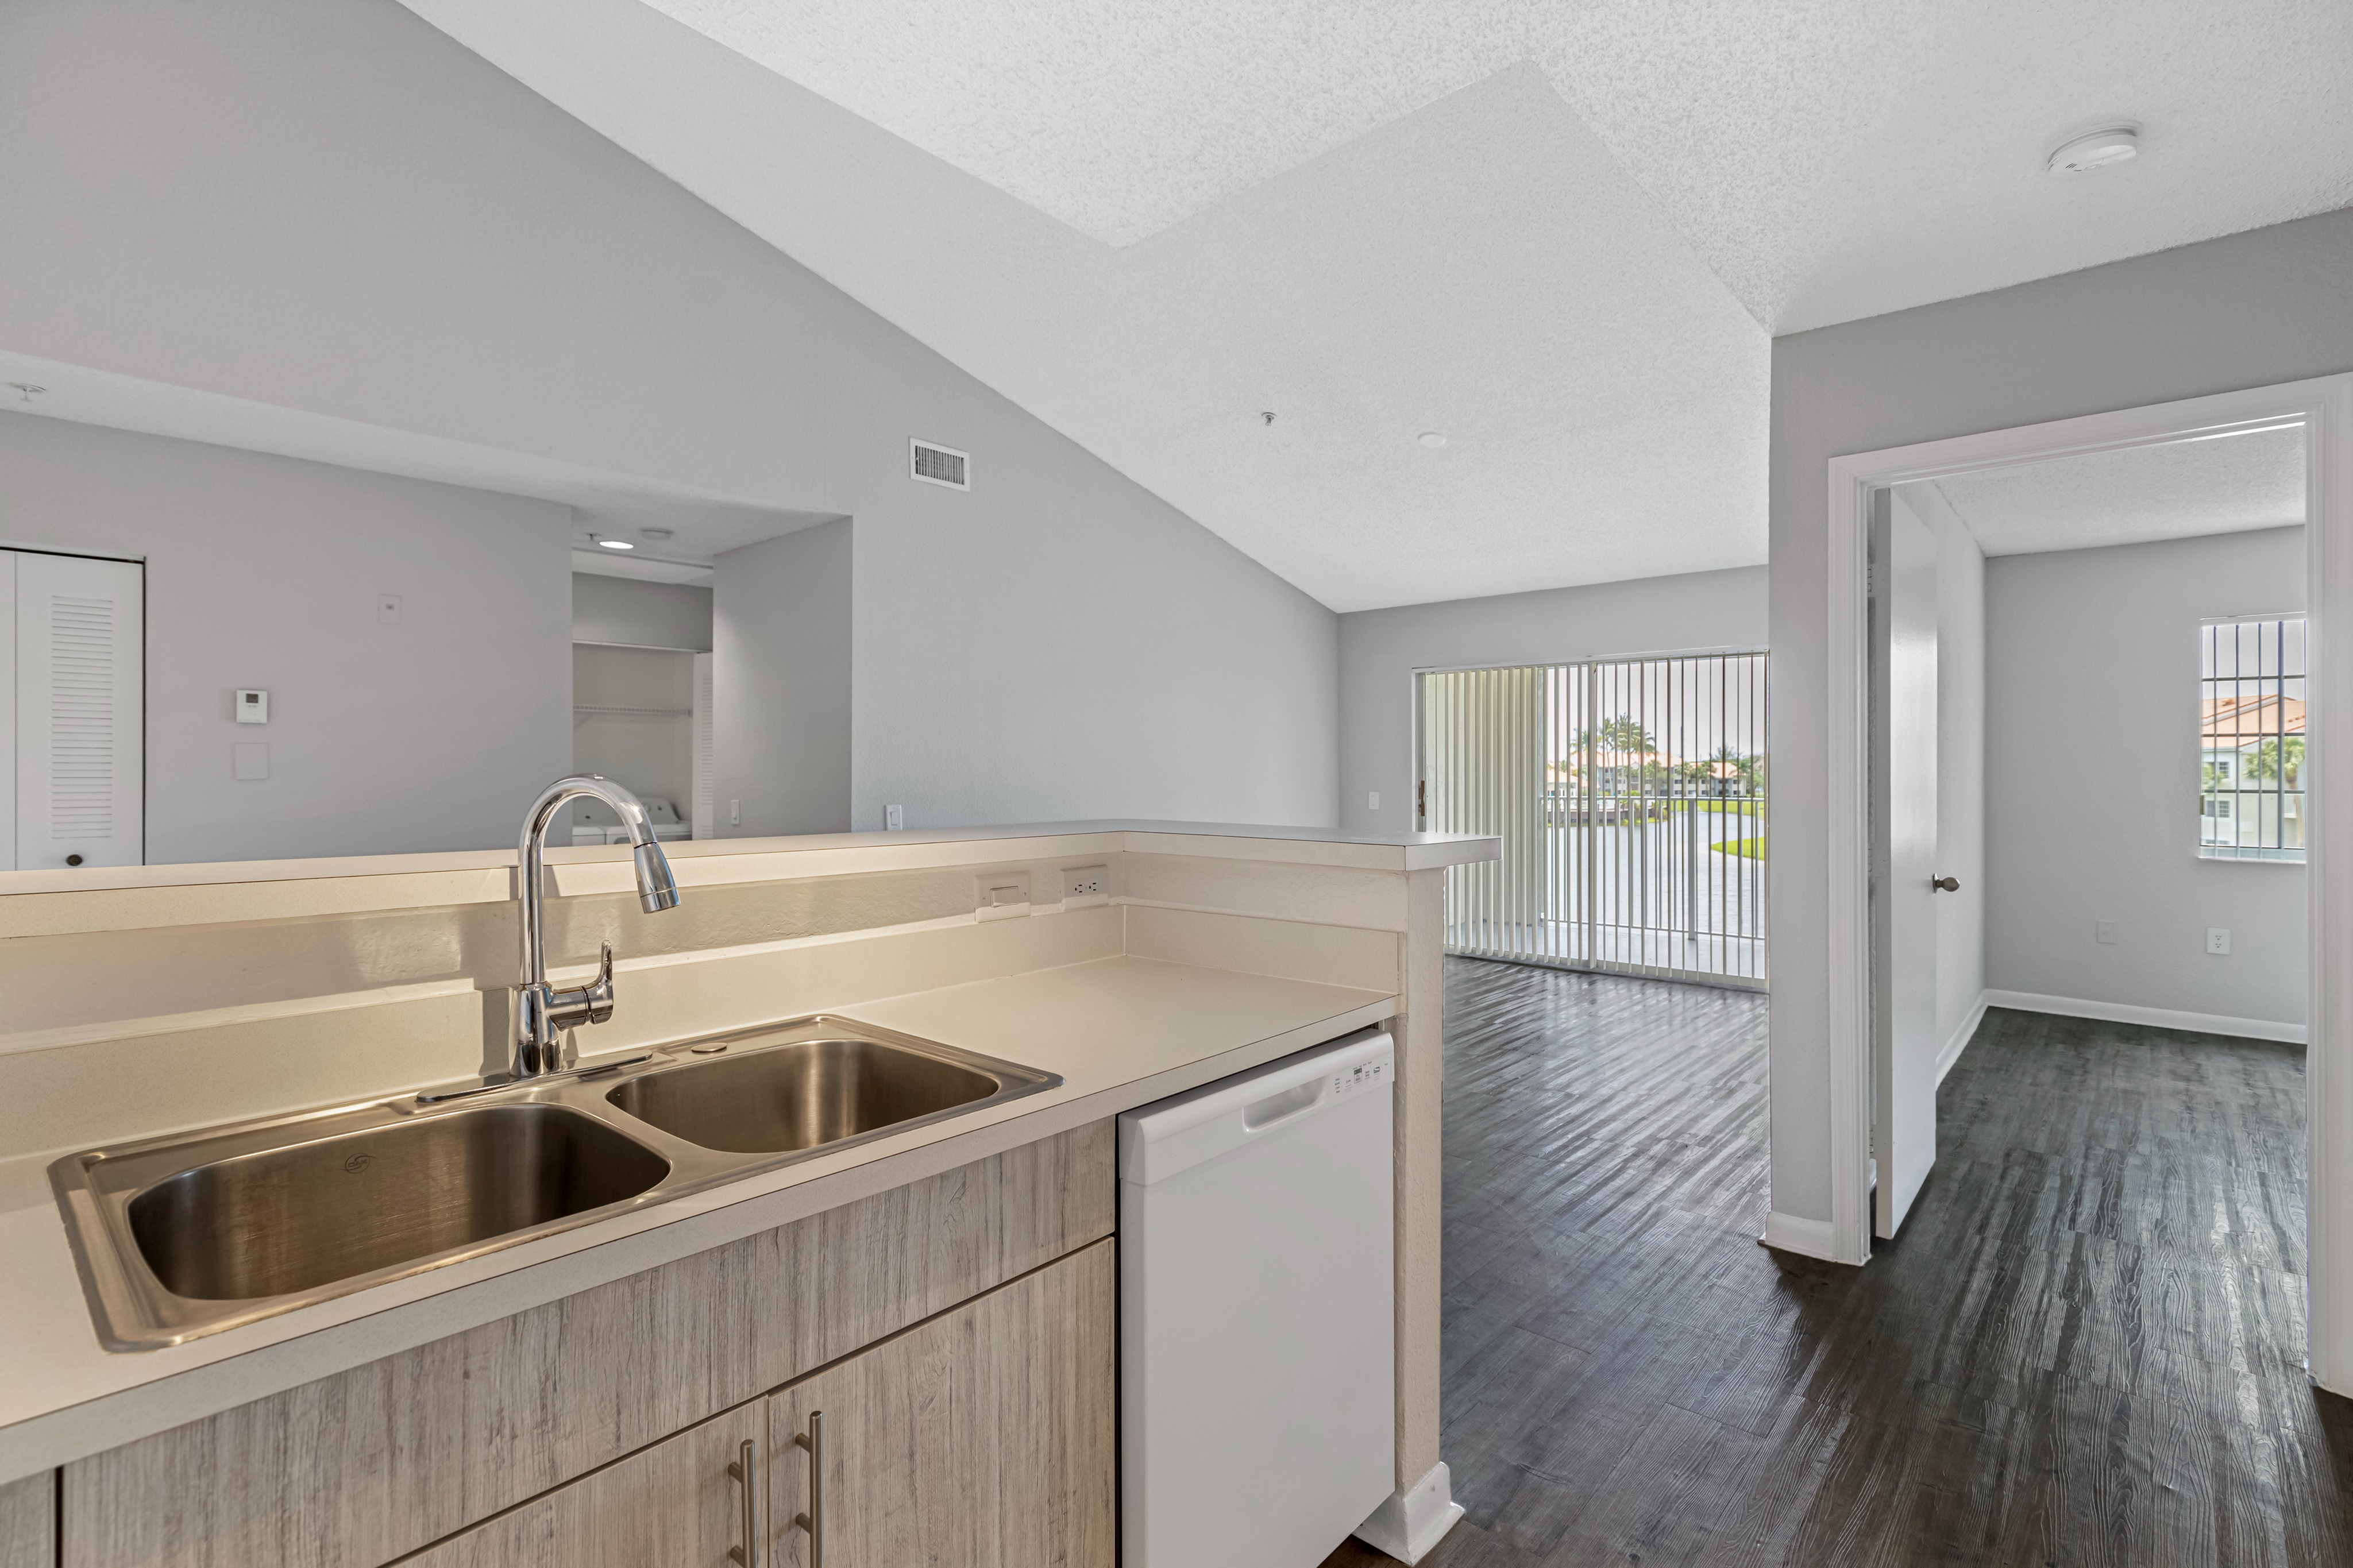 Apartment kitchen with white refrigerator and dishwasher connected to unfurnished living room with wood floors, vaulted ceiling, tracking lighting, sliding glass balcony doors, and raised bar peninsula countertop